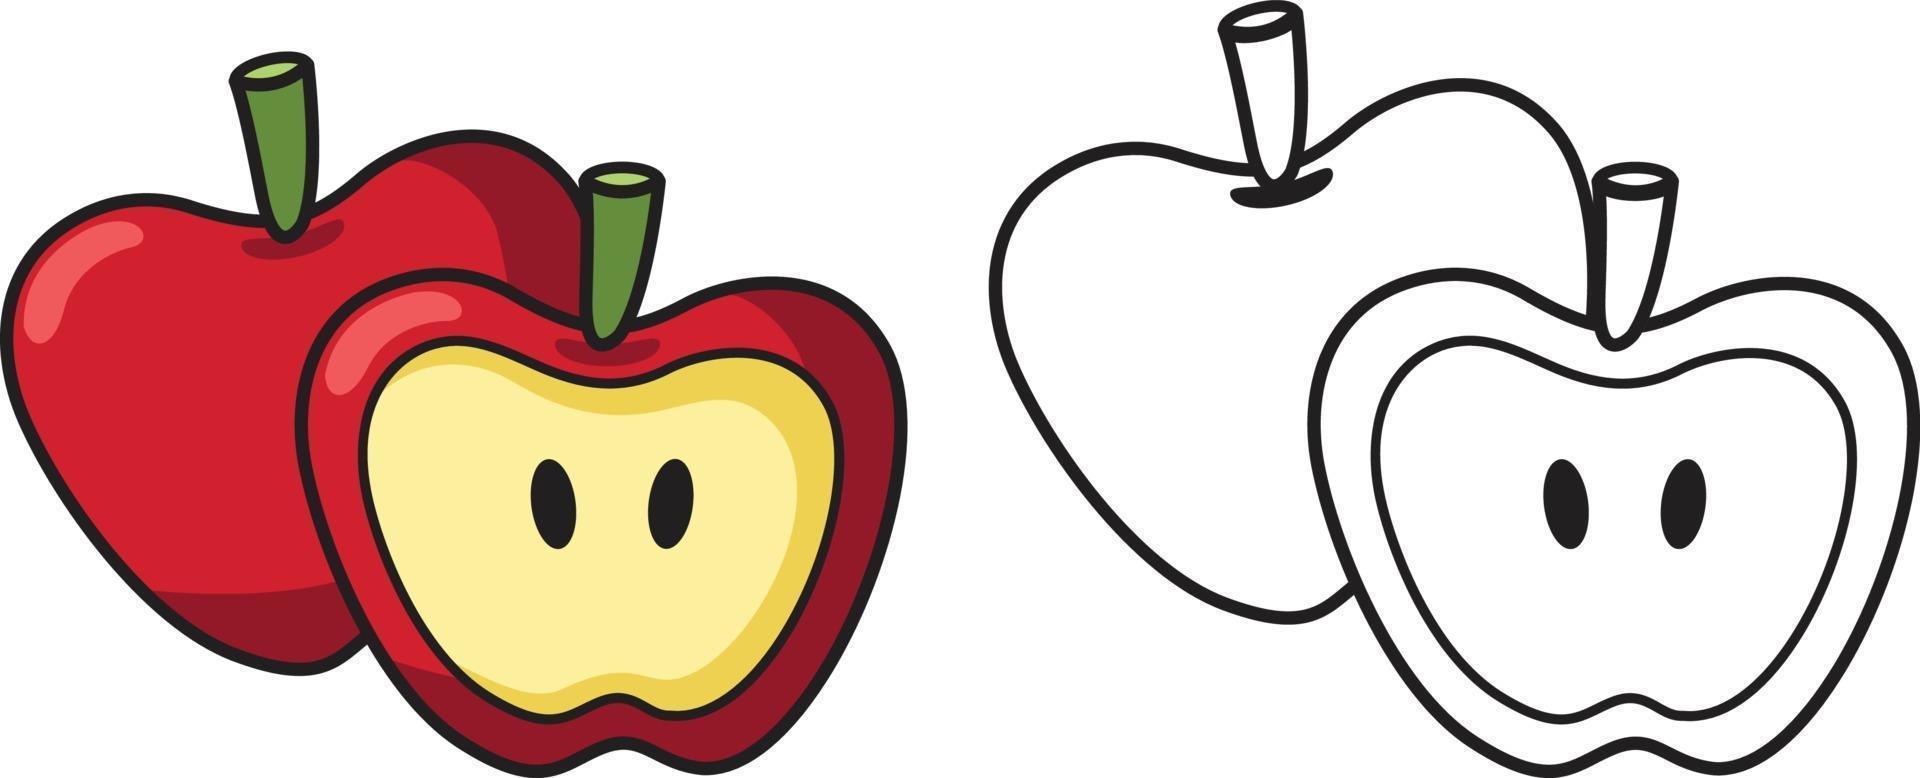 colorful and black and white apple for coloring book vector